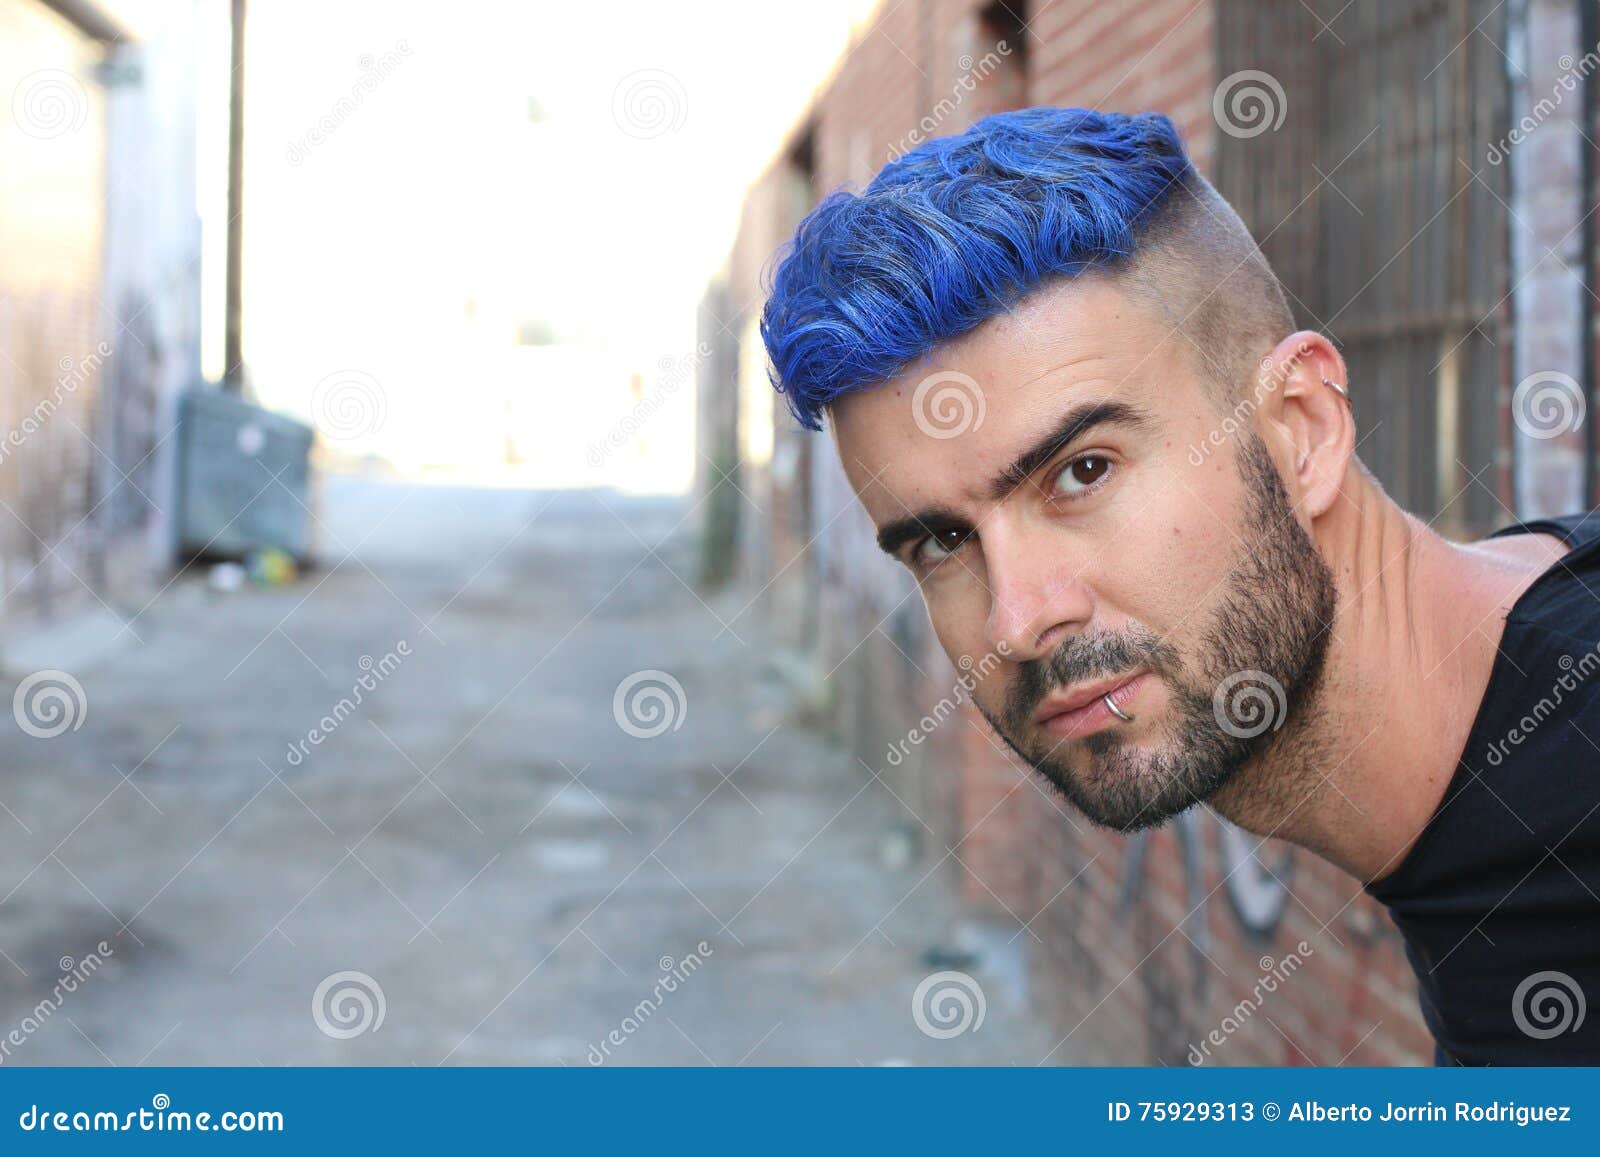 Old man with dyed blue hair - wide 4